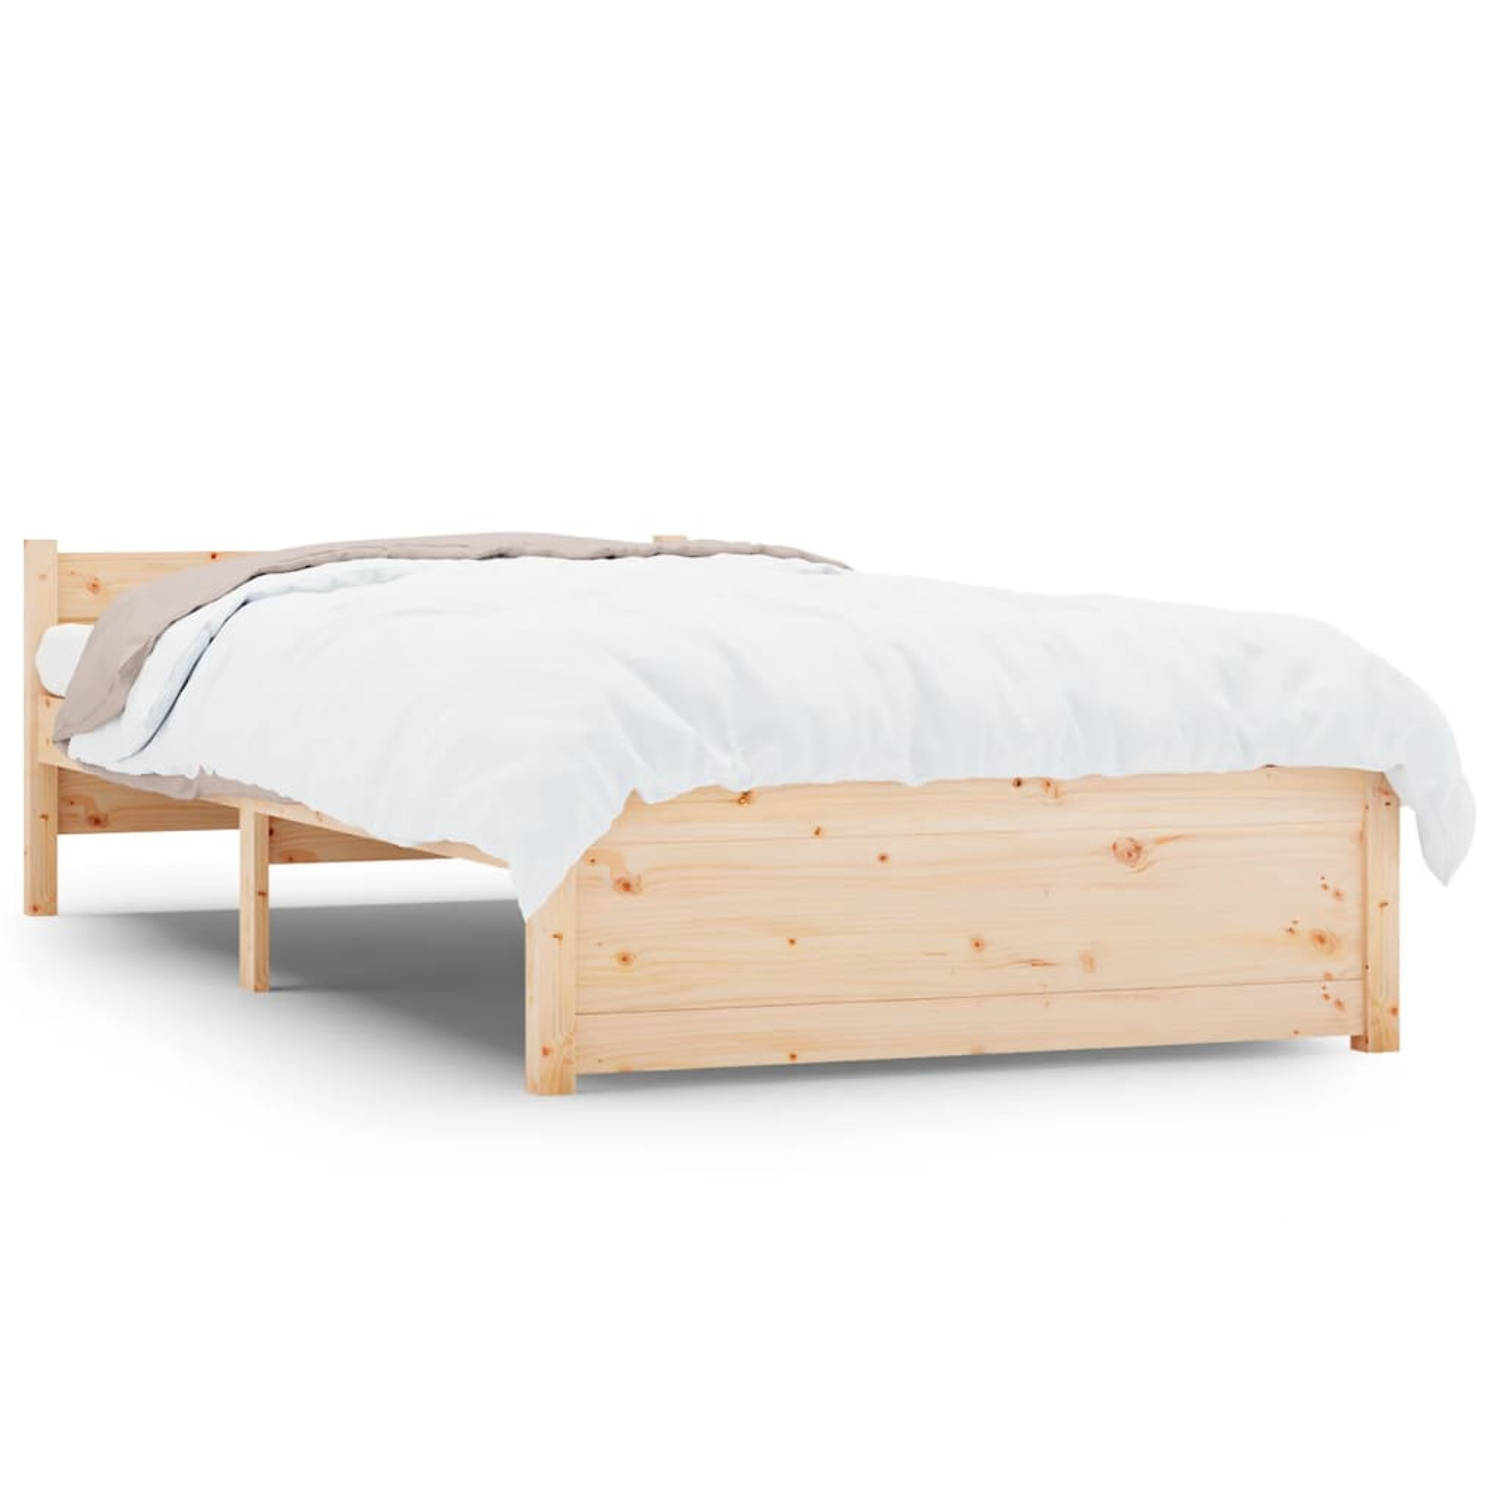 The Living Store Bedframe massief hout 100x200 cm - Bed